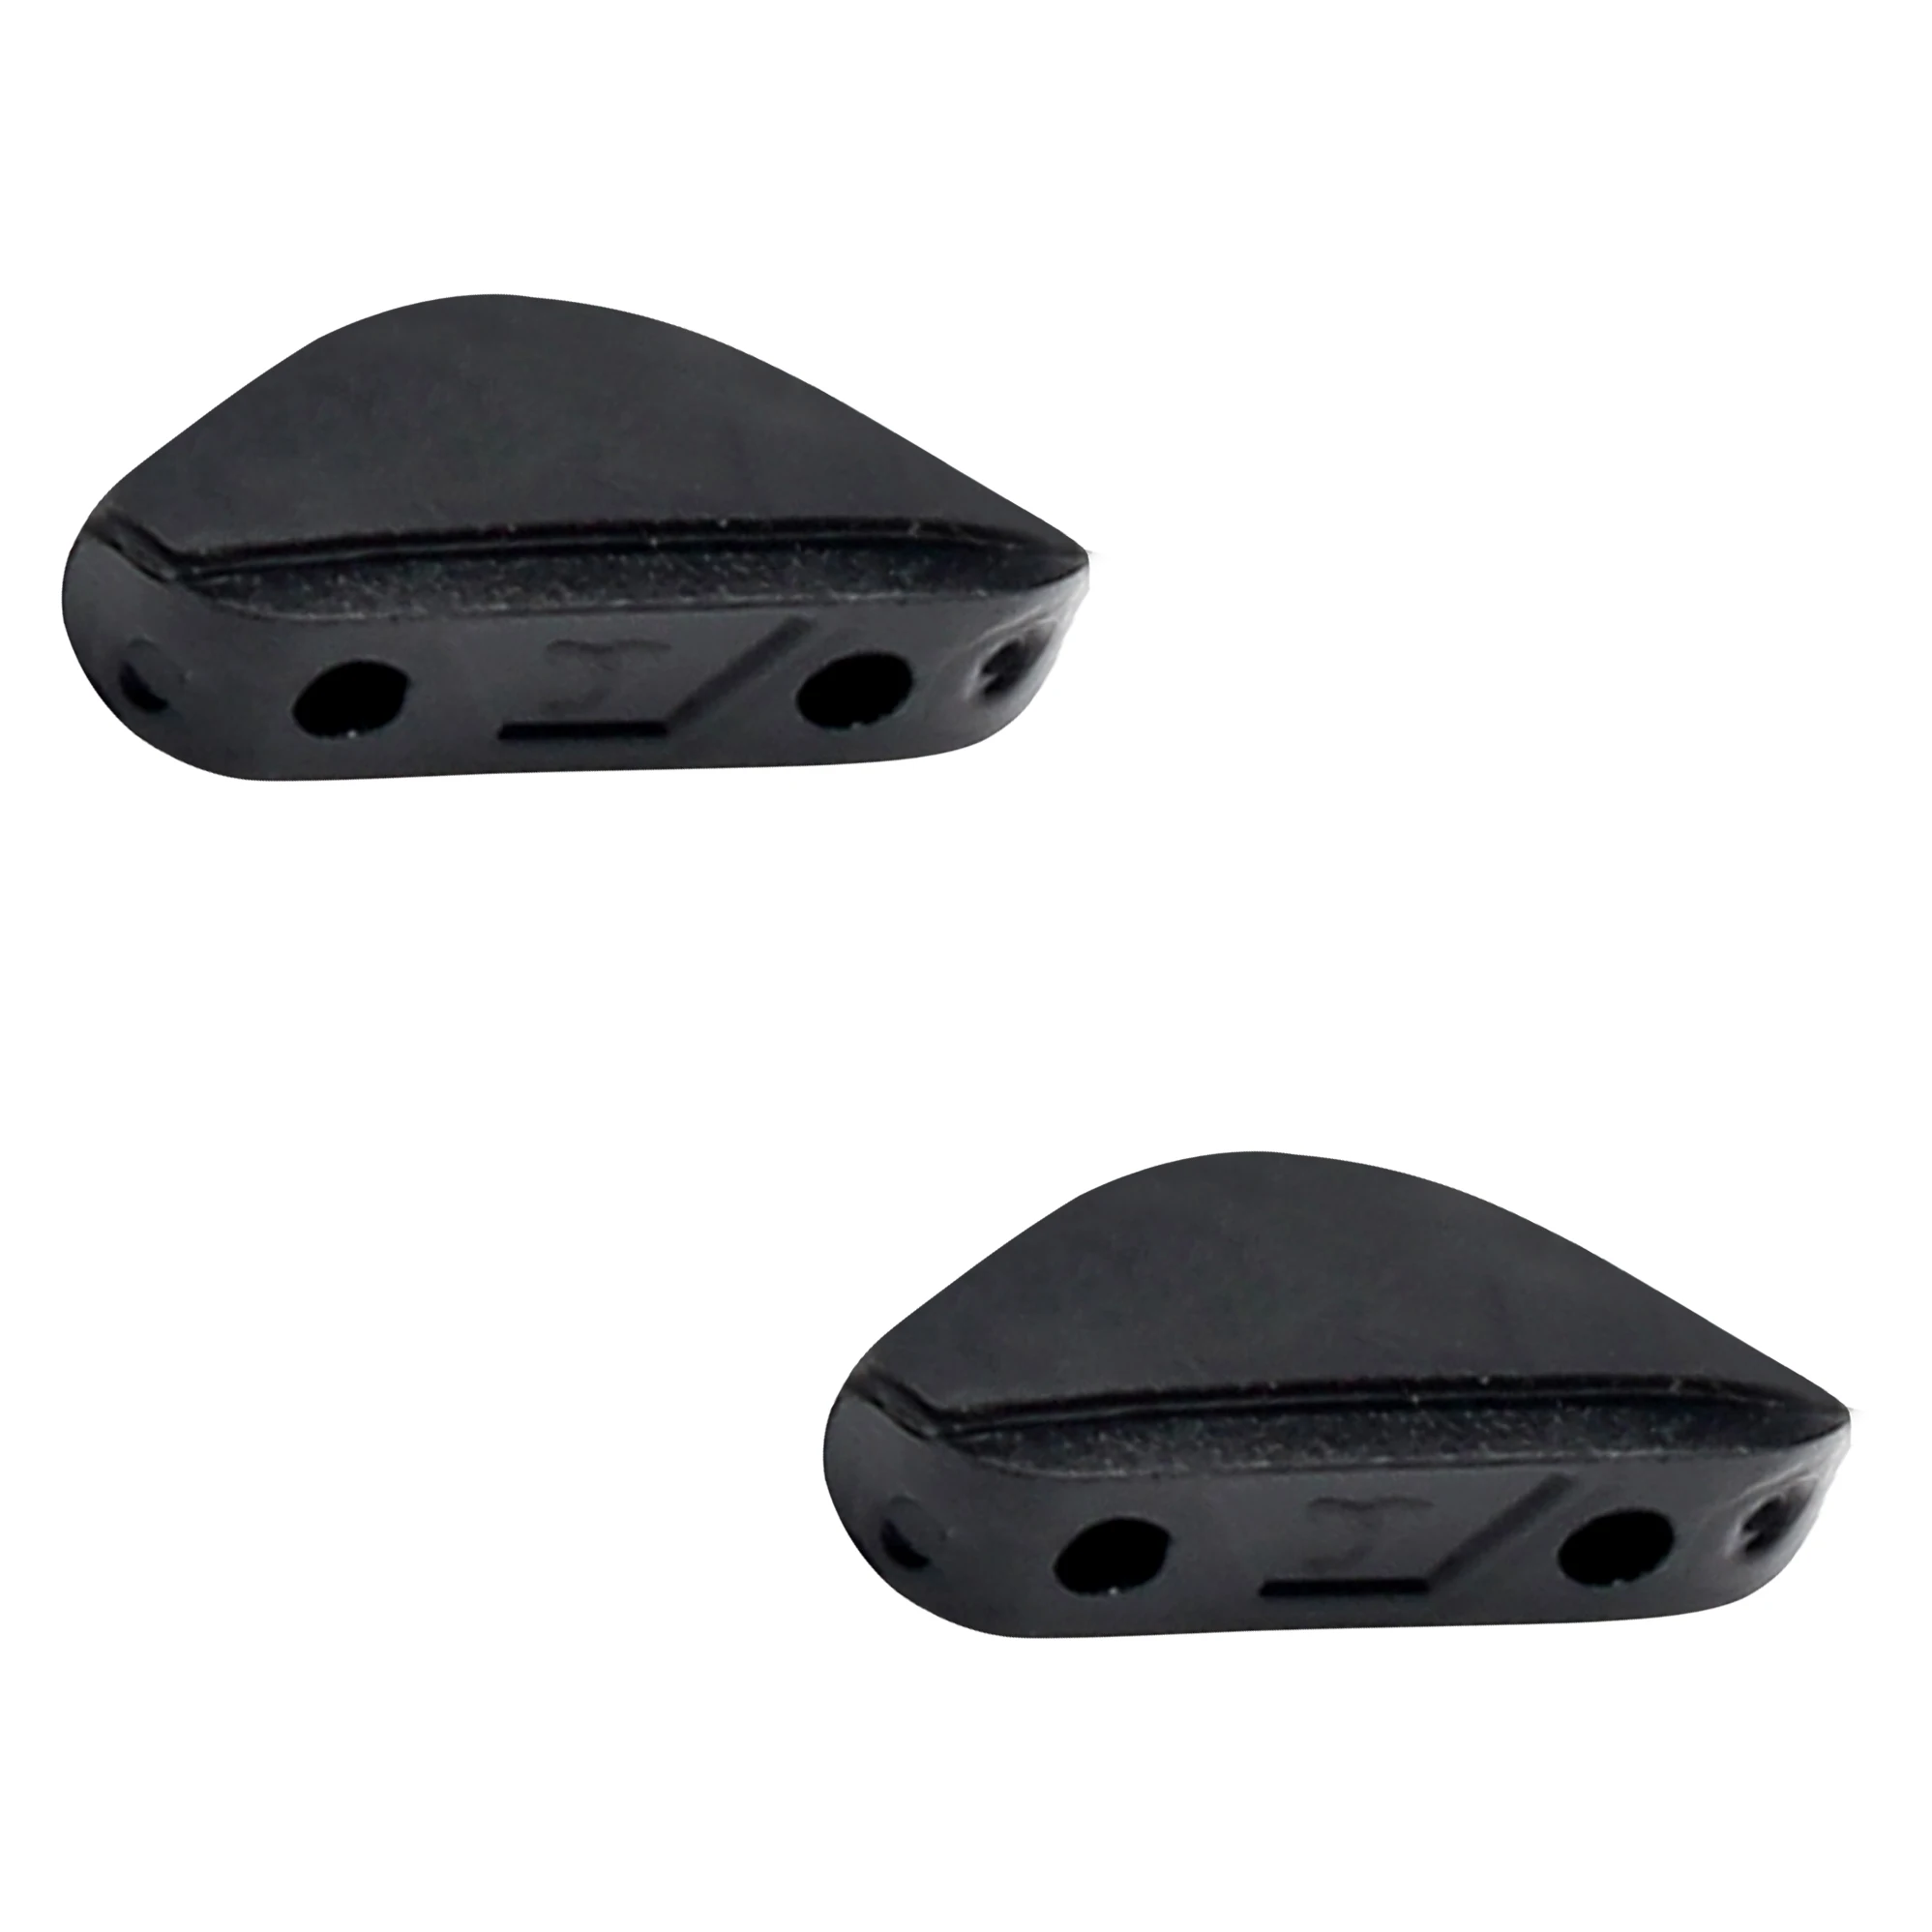 Bwake Replacement Rubber Hard Base Nose Pads for-Oakley She's Unstoppable OO9297 Sunglasses Frame - Multiple Options